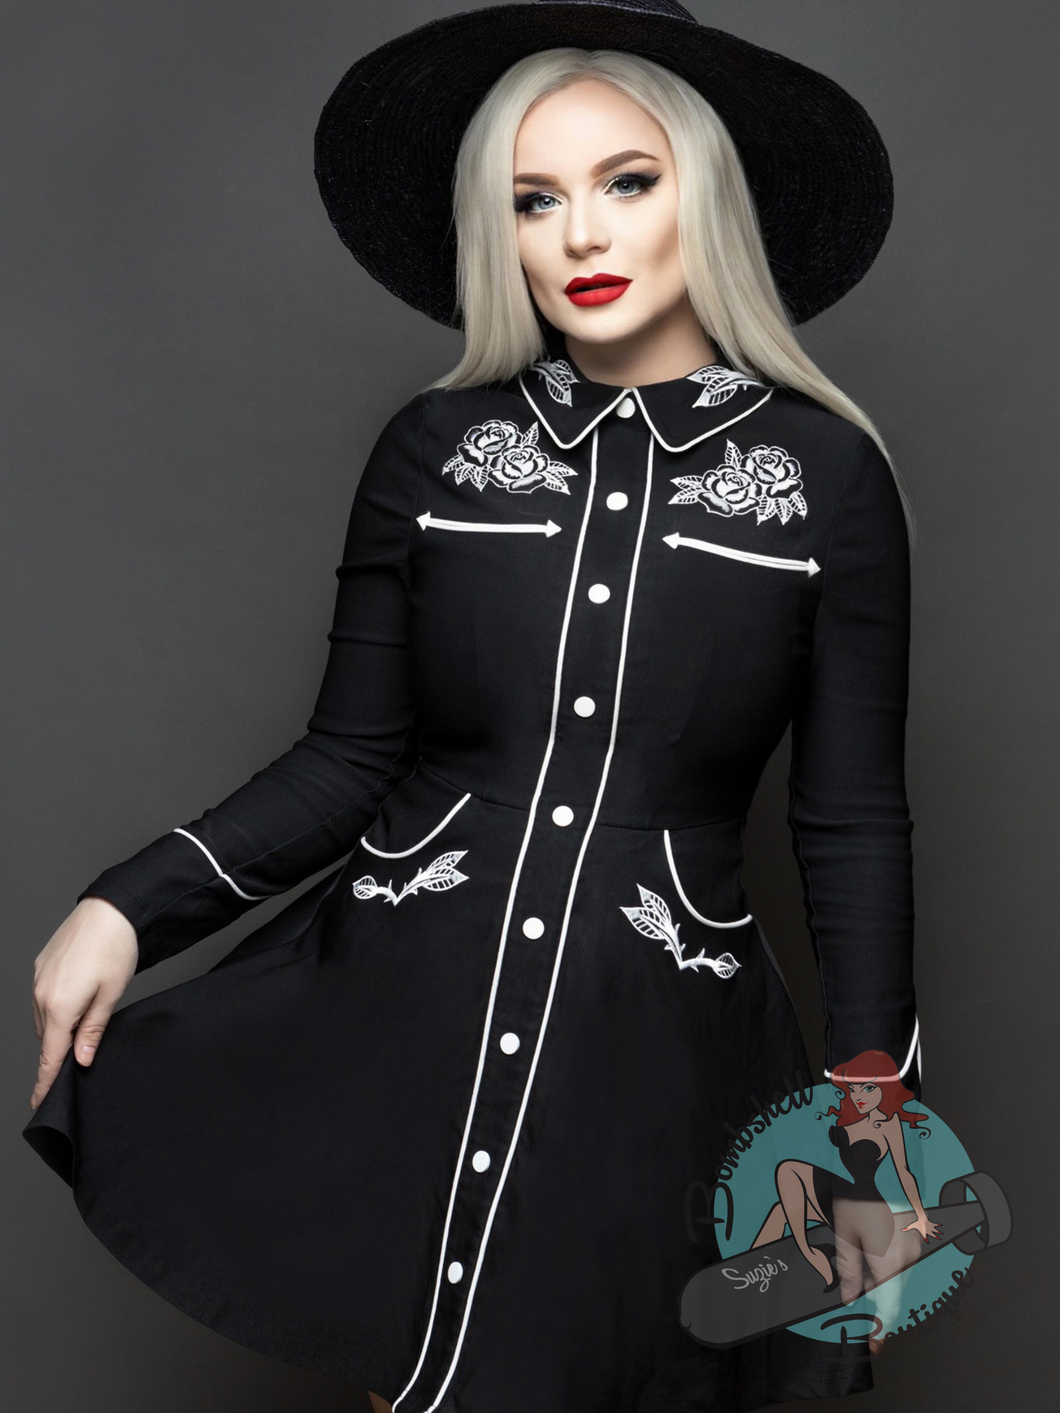 Short black Western swing dress with white roses embroidery and pockets. Perfect for a pinup rockabilly or rodeo event.